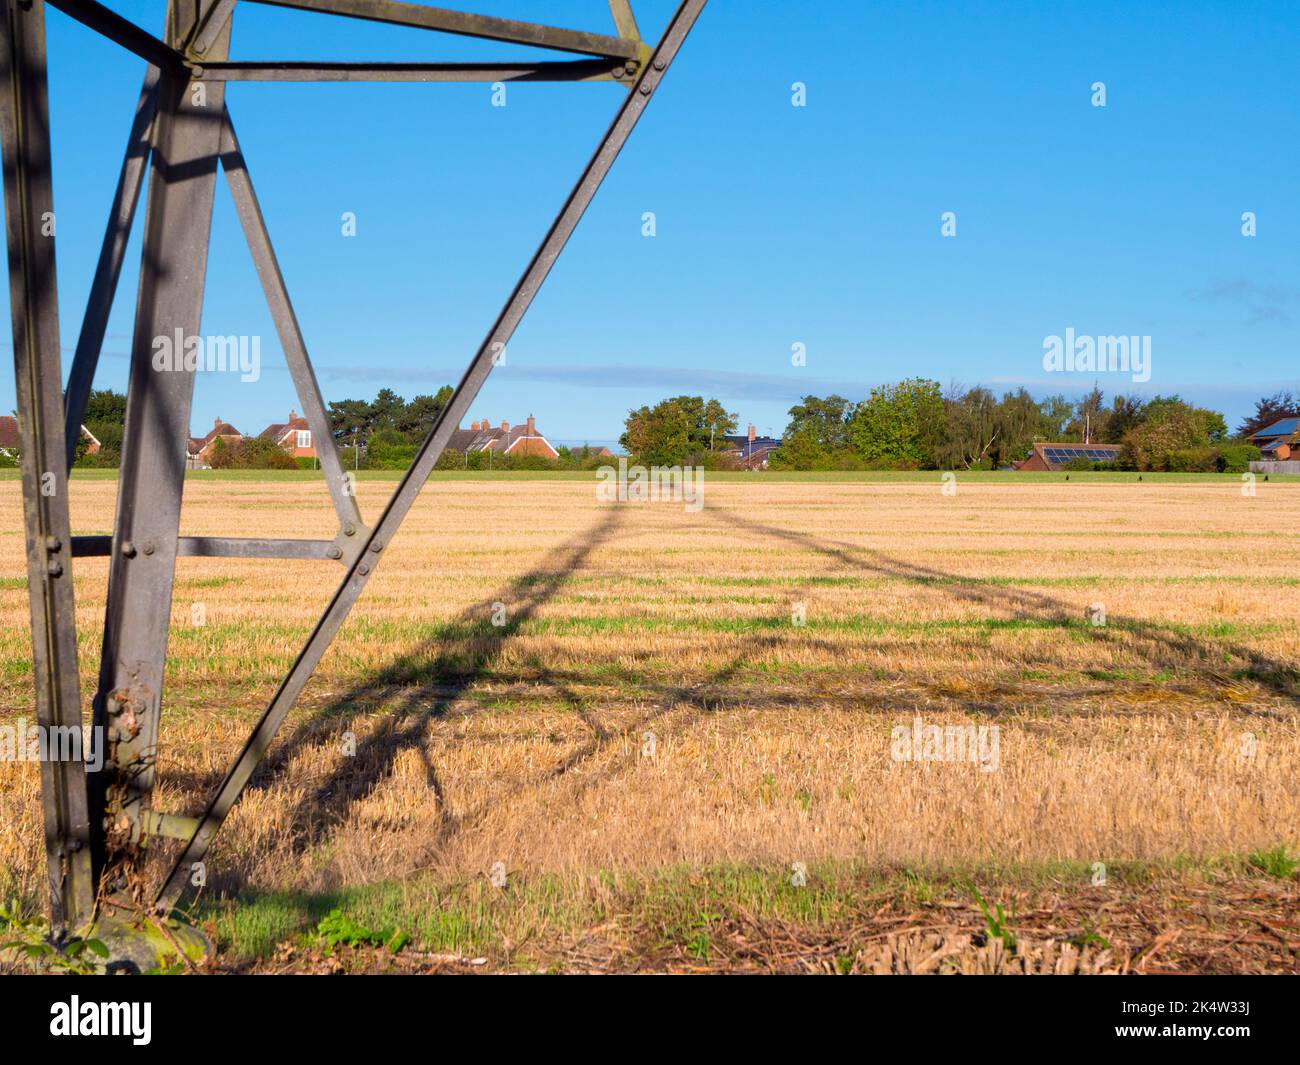 I love electricity pylons; I find their abstract, gaunt shapes endlessly fascinating. Here we see shadows cast by a large pylon in a field in rural Ra Stock Photo